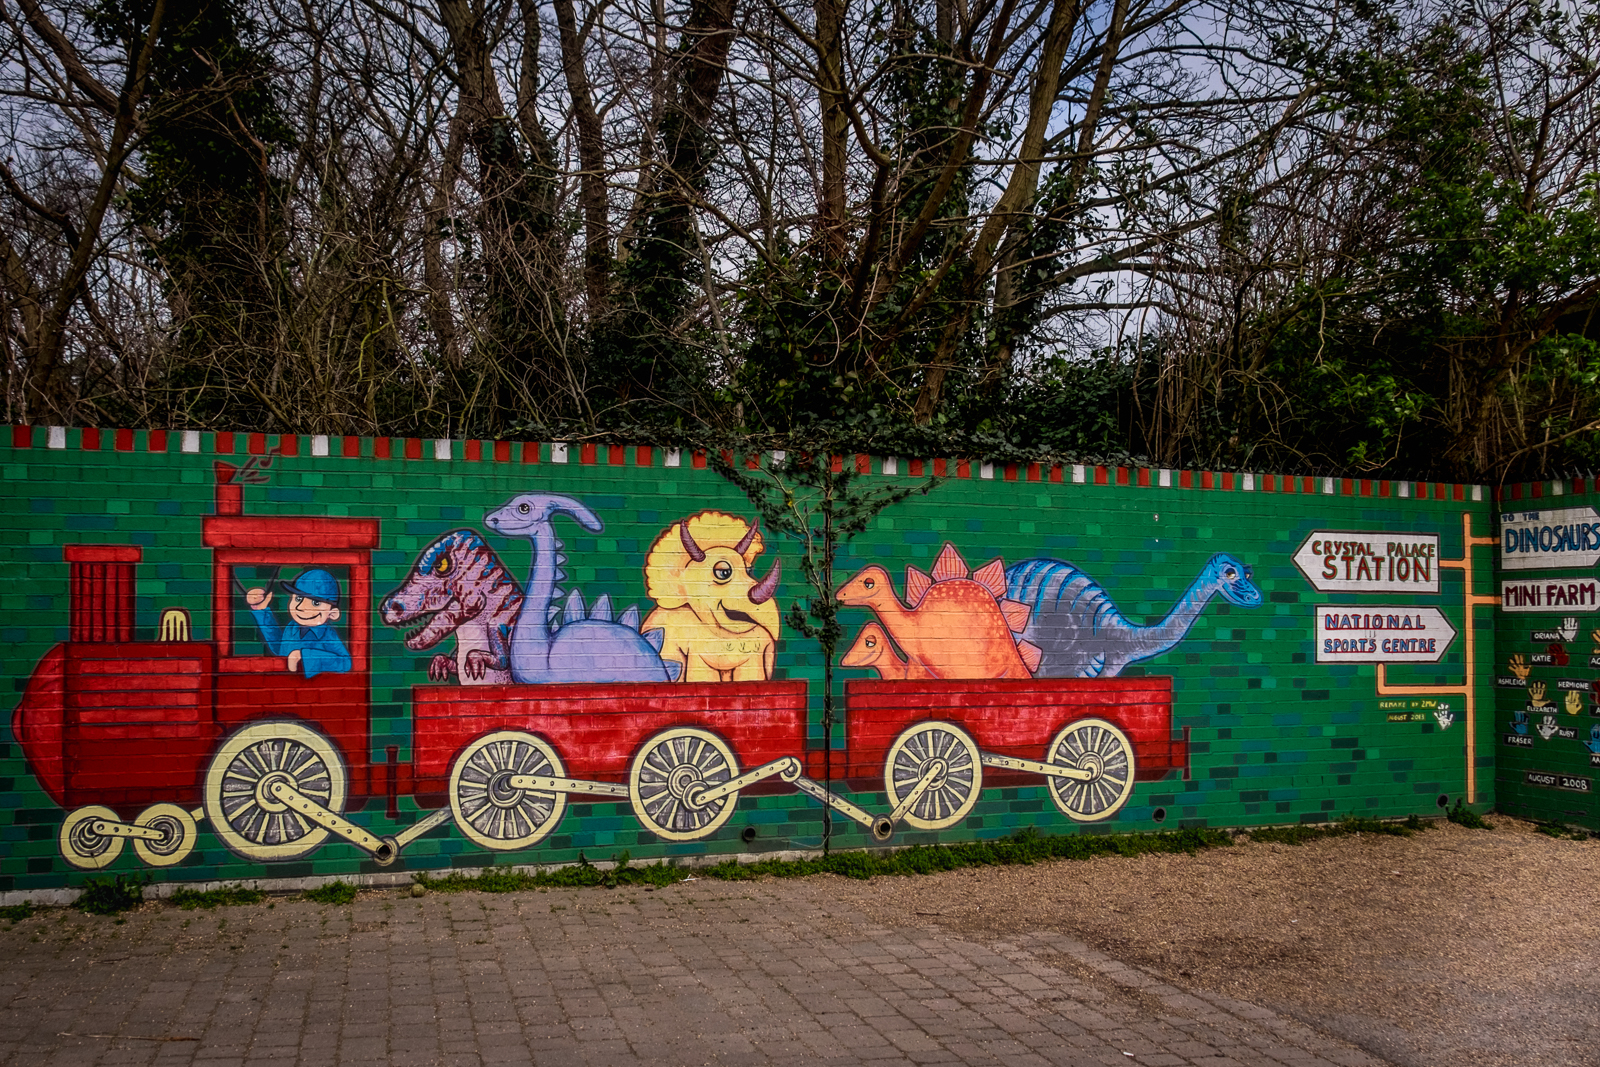 20170327_Bromley_Crystal-Palace-Park_Turn-Right-to-Dinosaurs